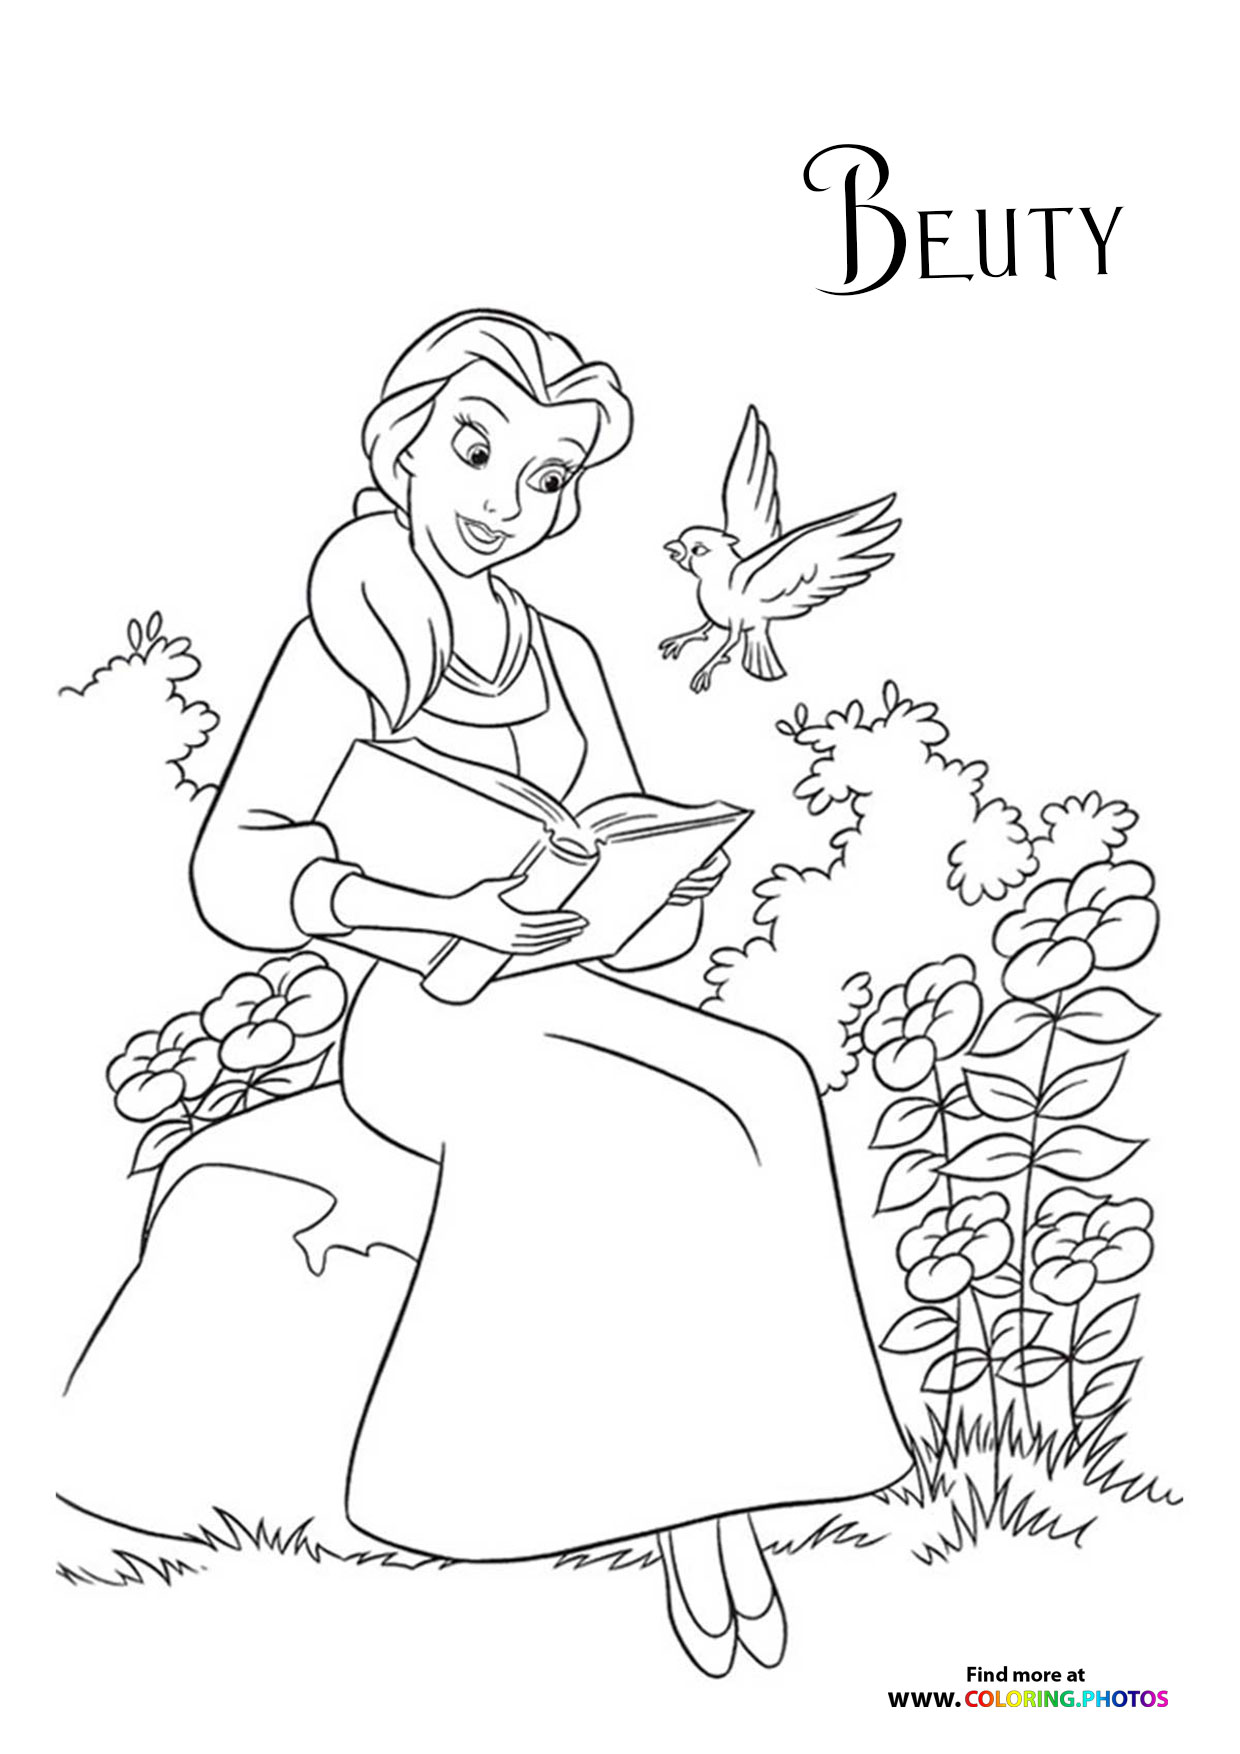 Princess Belle reading a book   Coloring Pages for kids